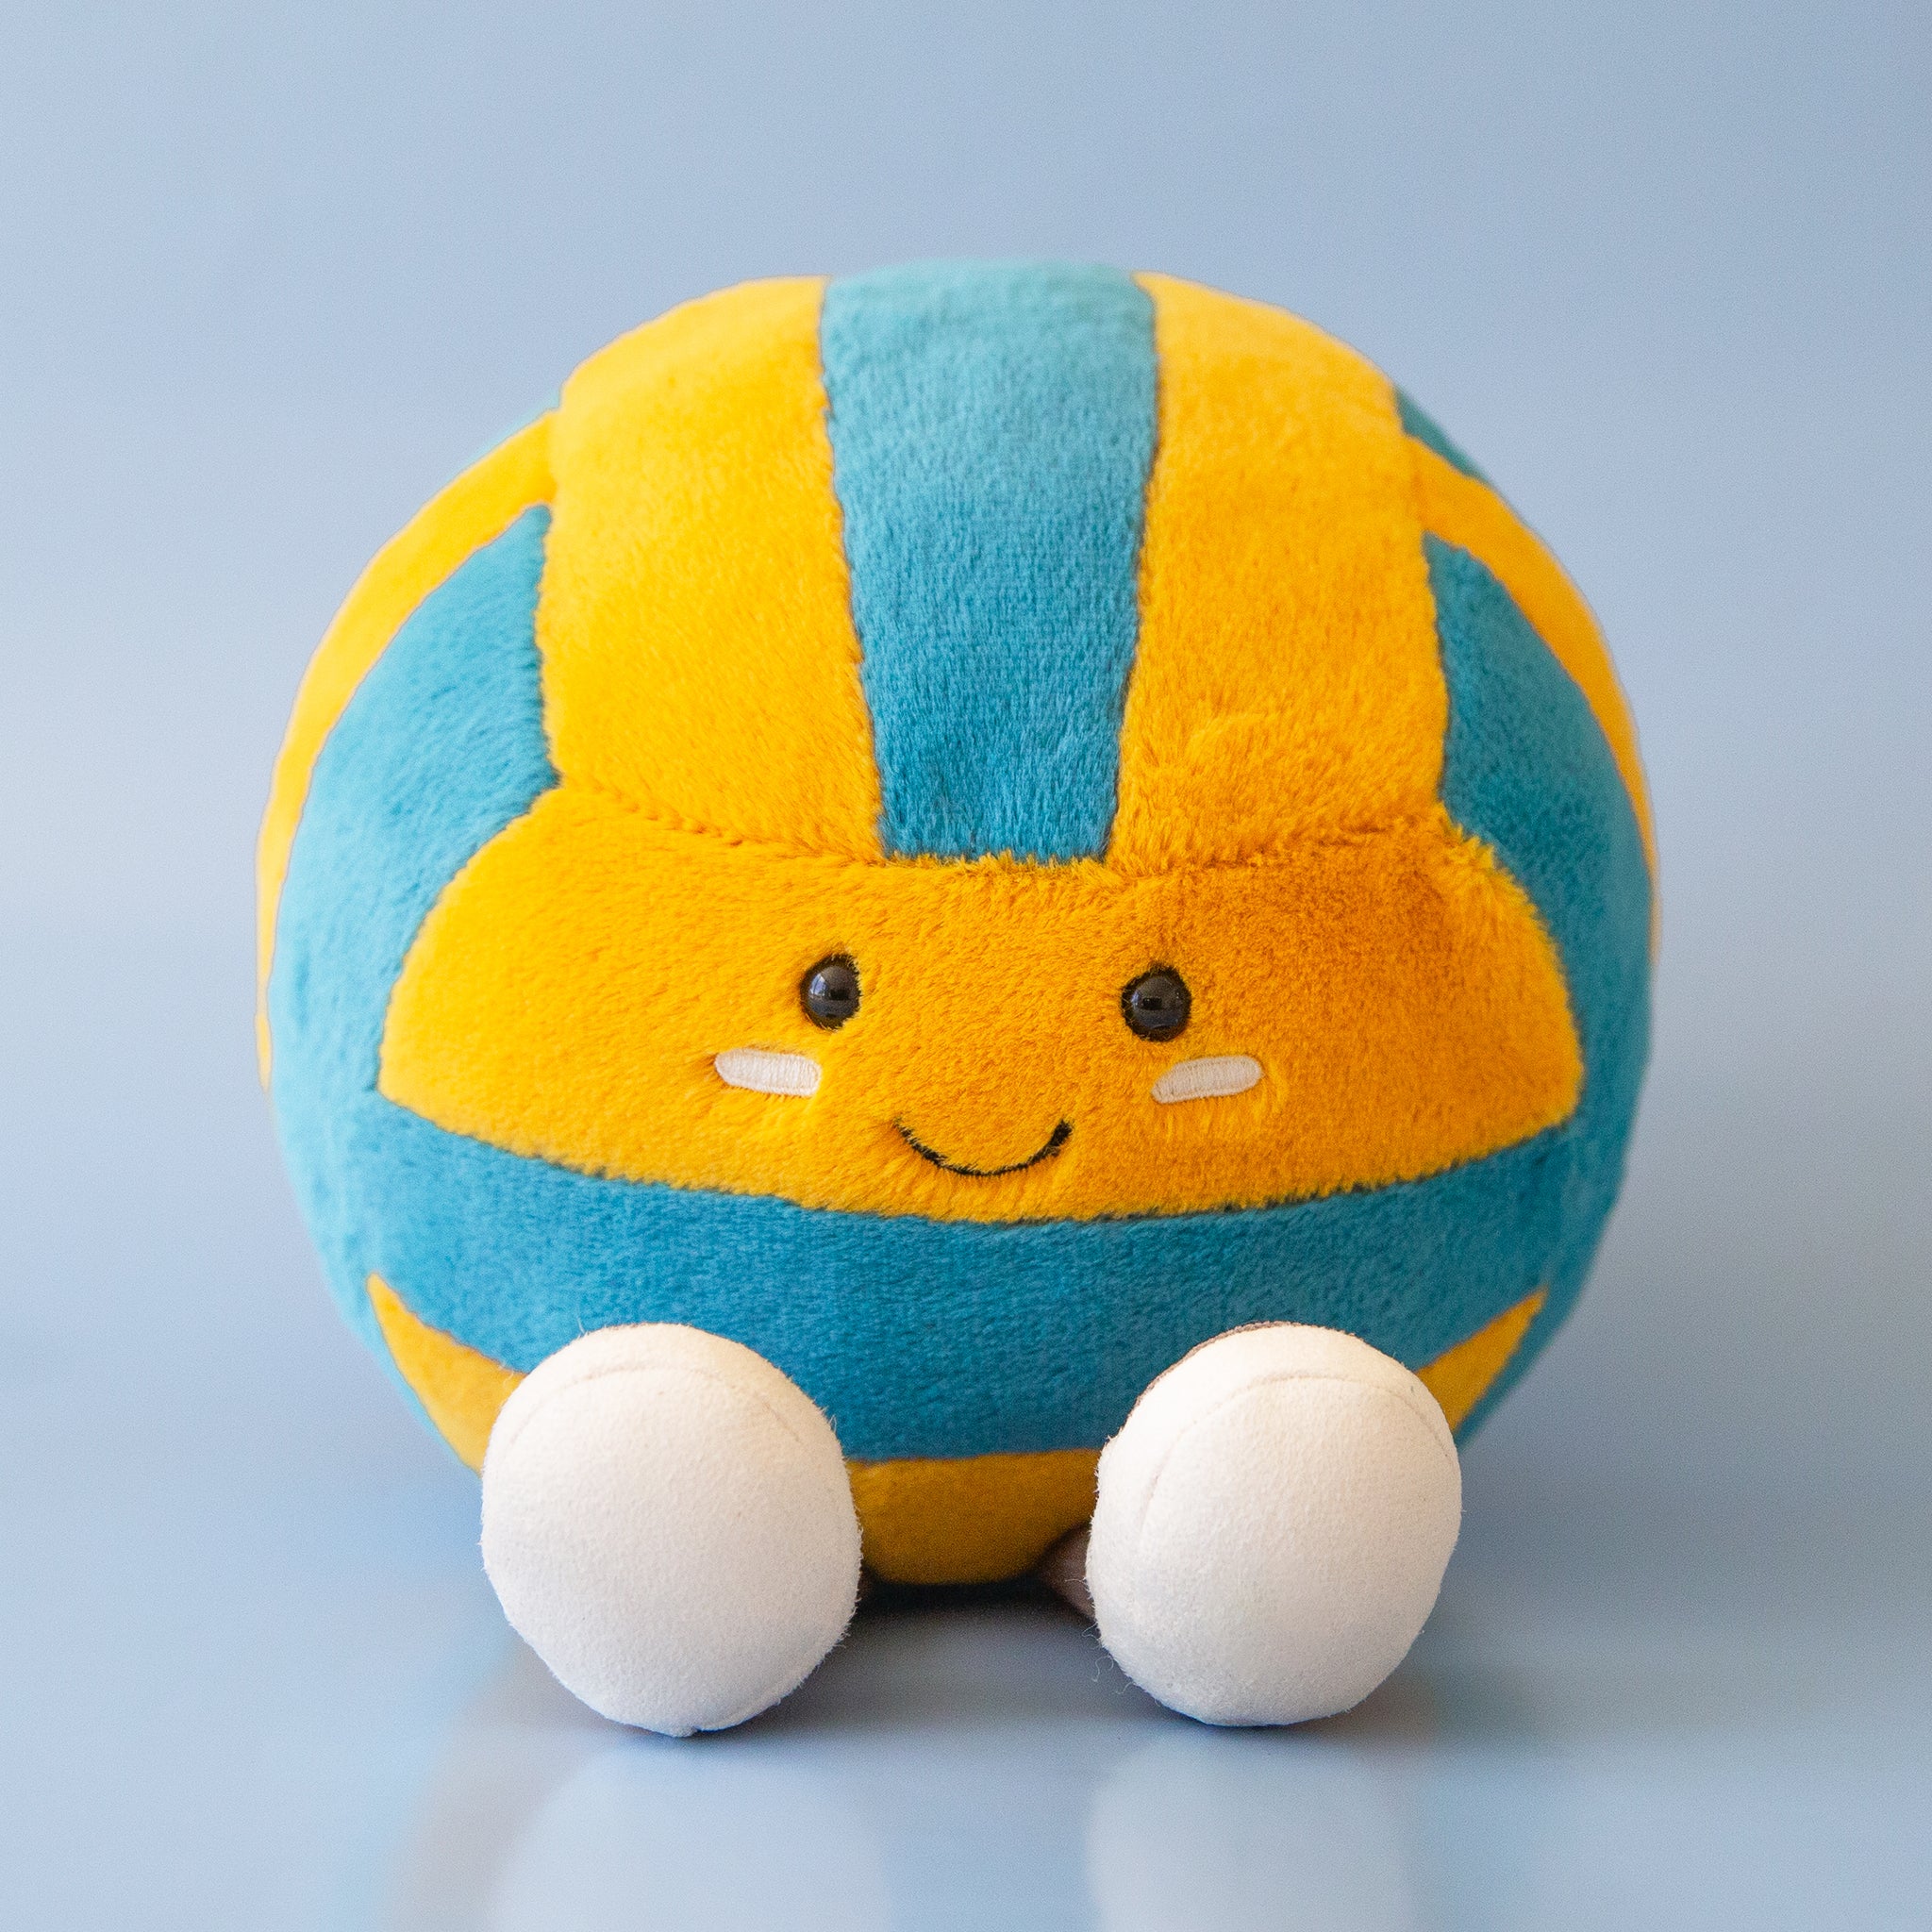 A blue and yellow stuffed toy in the shape of a volleyball with adorable legs, feet and a smiling face.